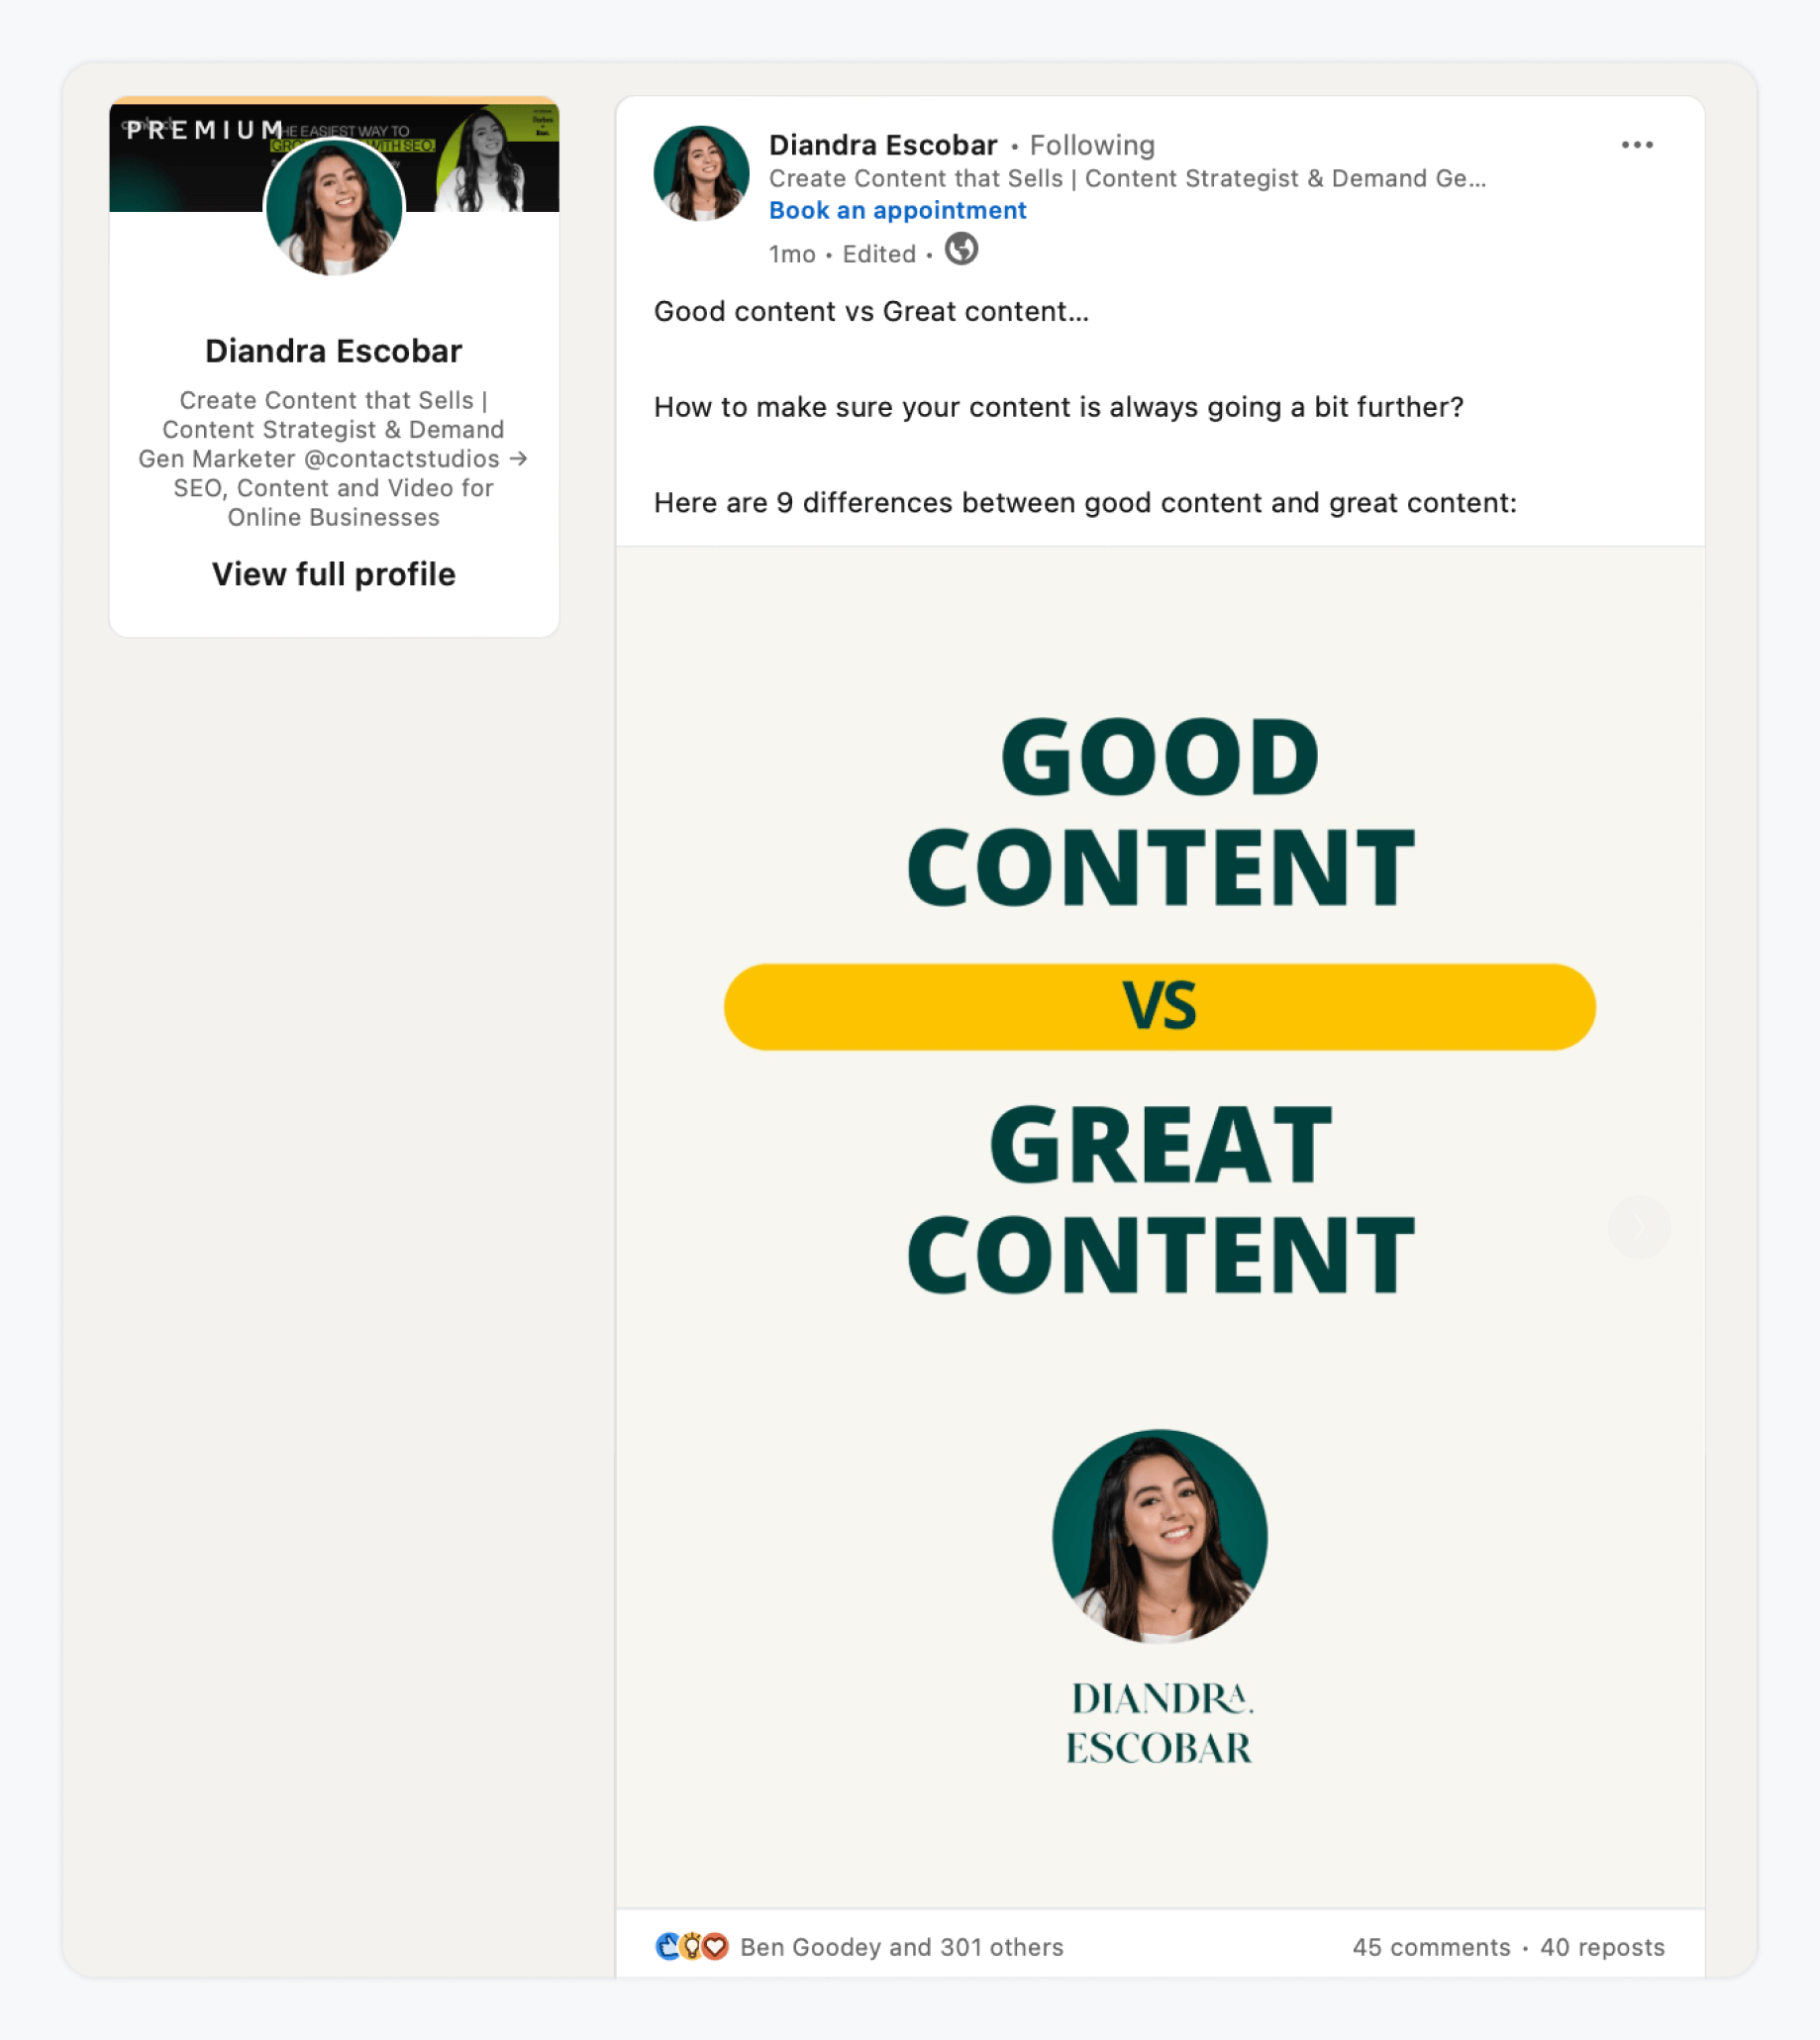 An image shows a person sharing expert tips about good vs great content on LinkedIn